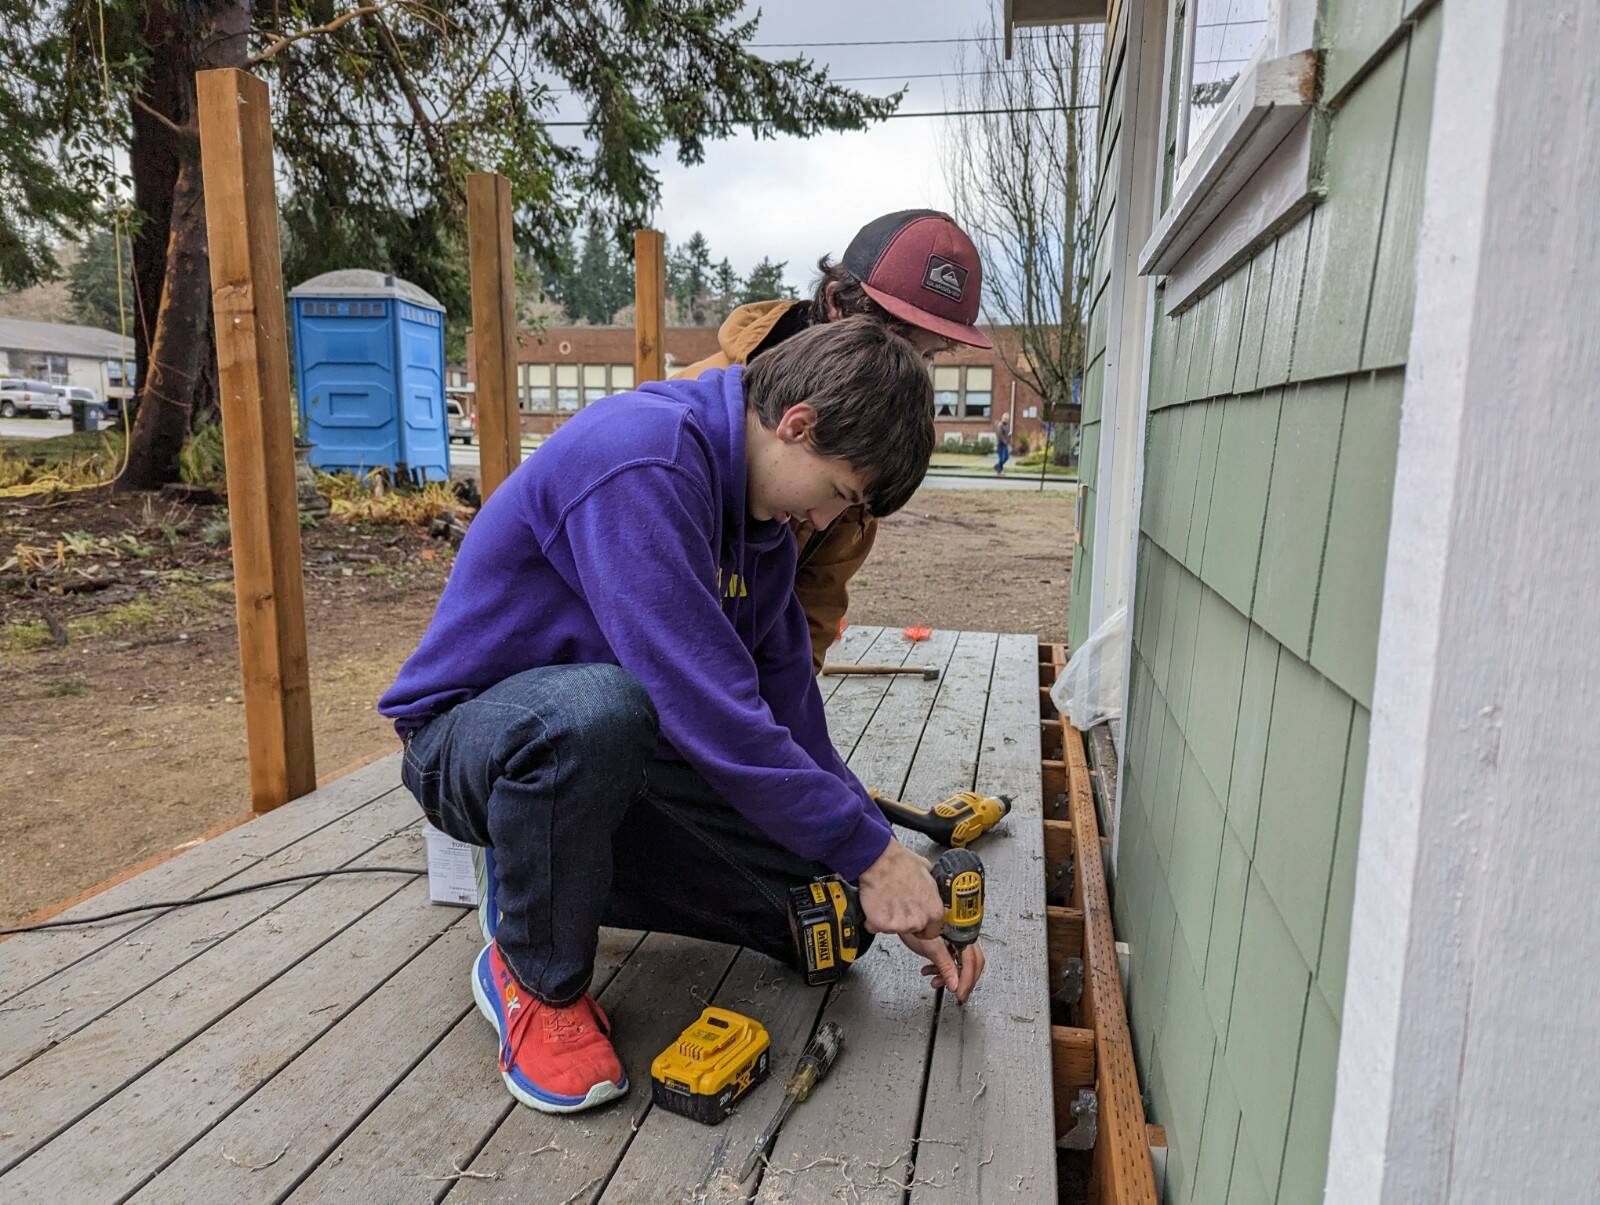 Photo provided
Masyn Eberhardy and Jack Rafferty from Oak Harbor build a deck for one of the tiny homes in Langley.